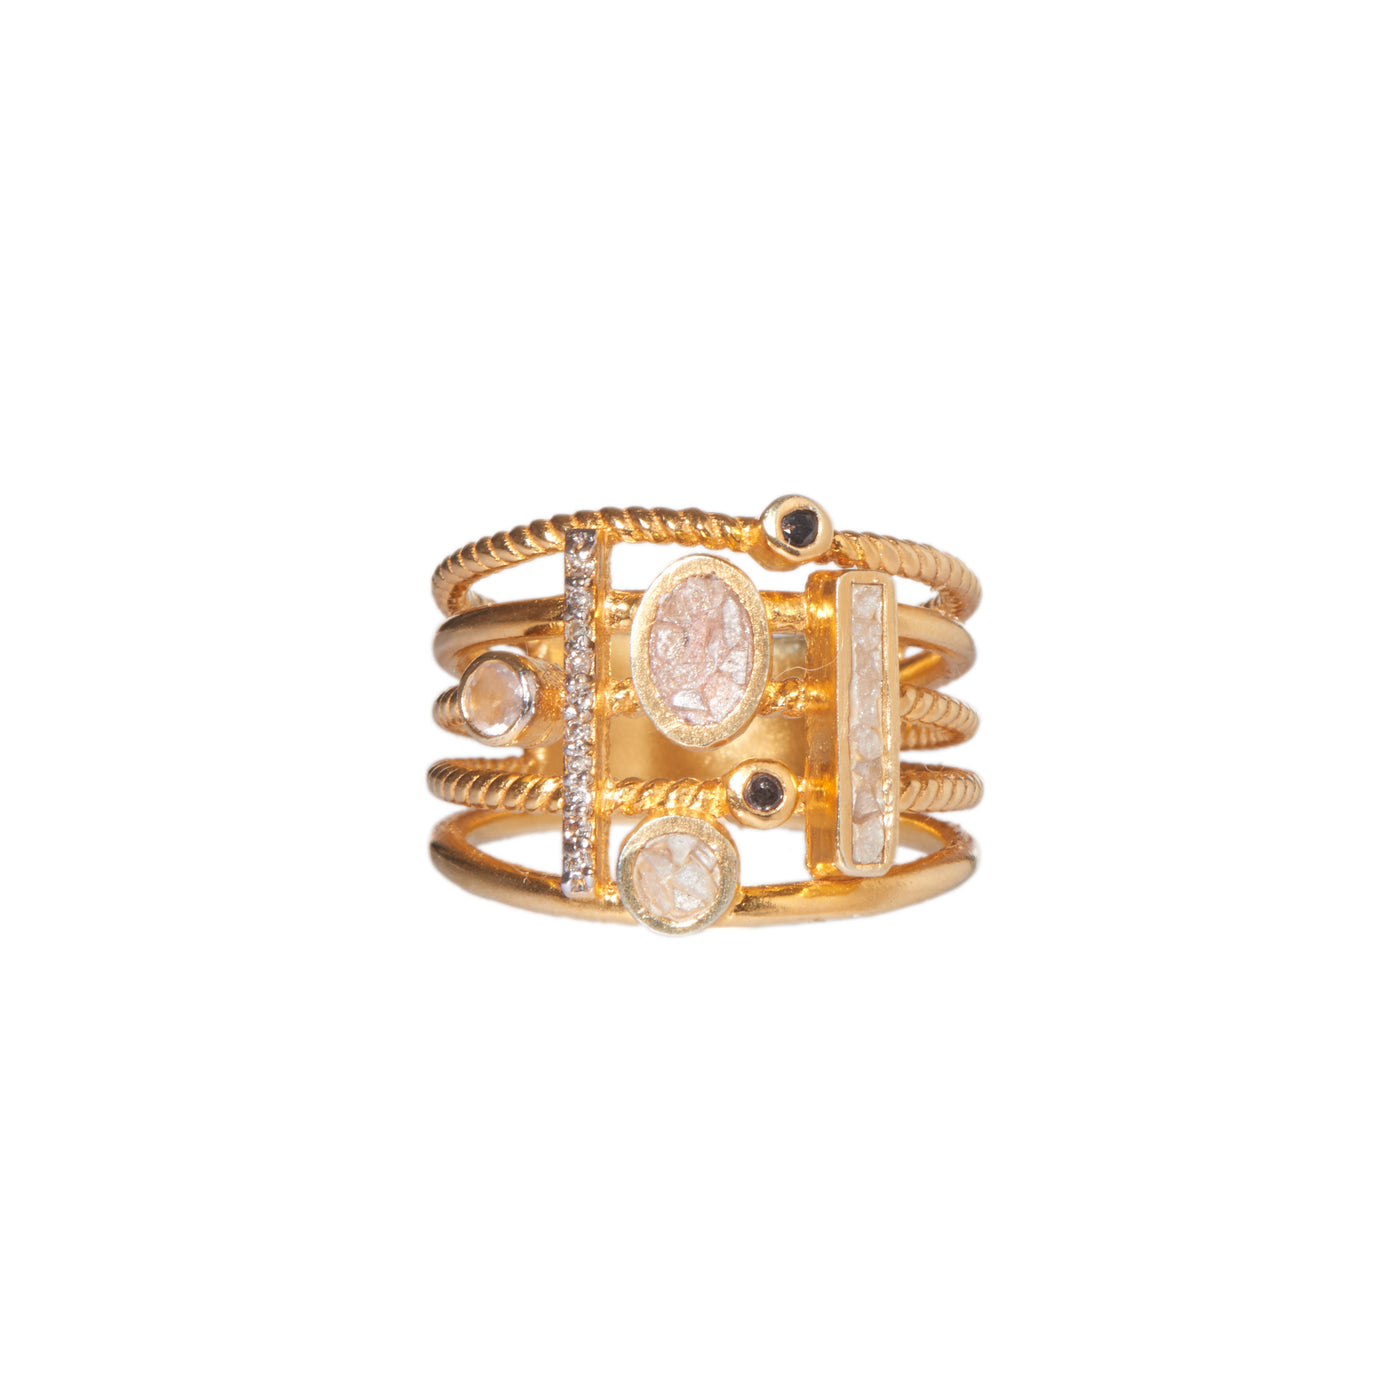 Solis Gold Vermeil Ring Stack